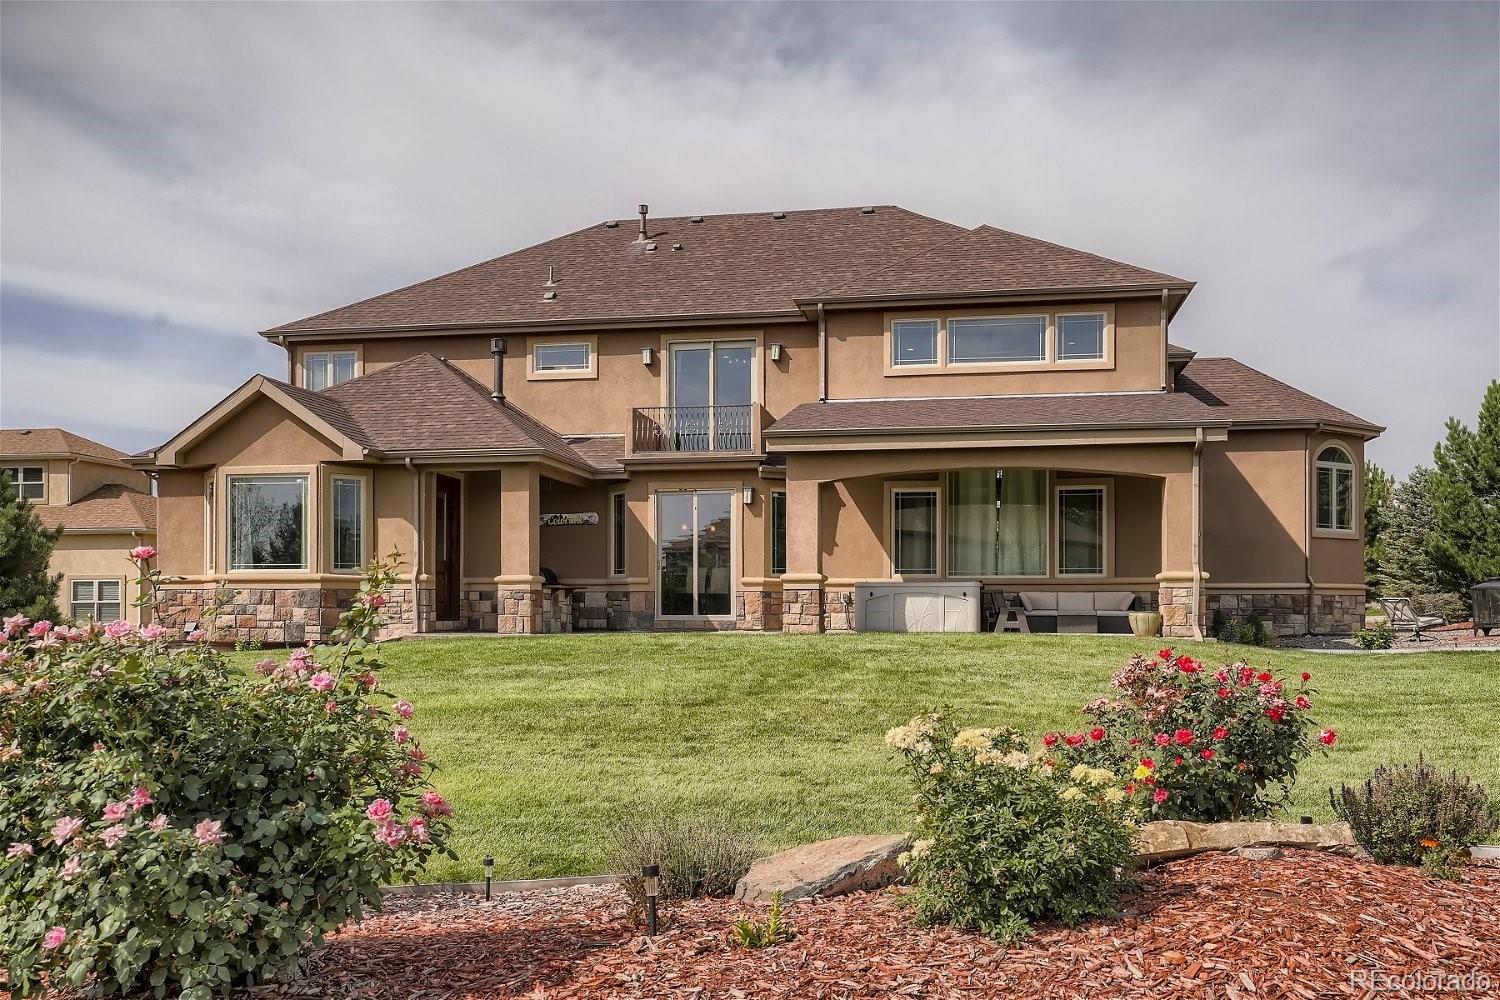 8371 E 129th Place, thornton MLS: 3221337 Beds: 5 Baths: 6 Price: $1,380,000